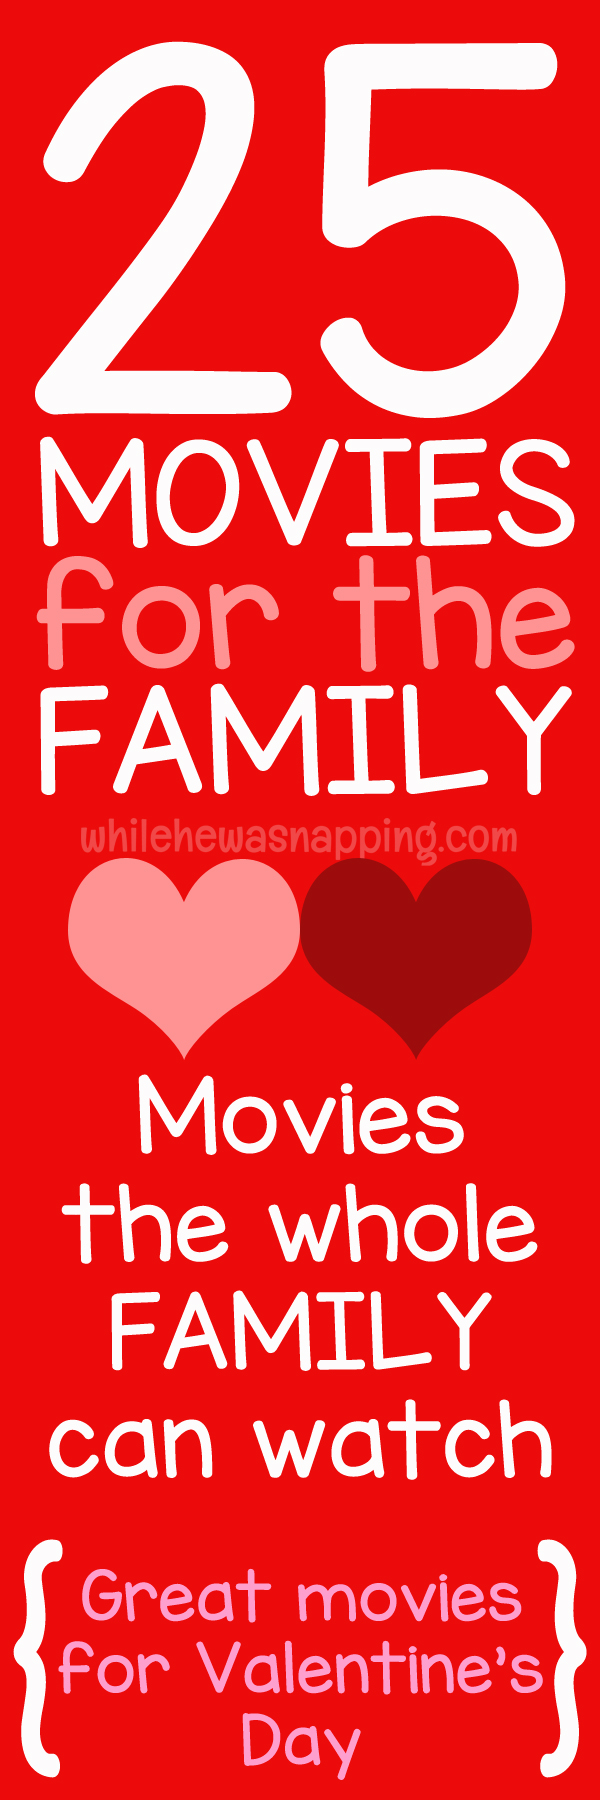 25 Feel-Good Movies for the Family